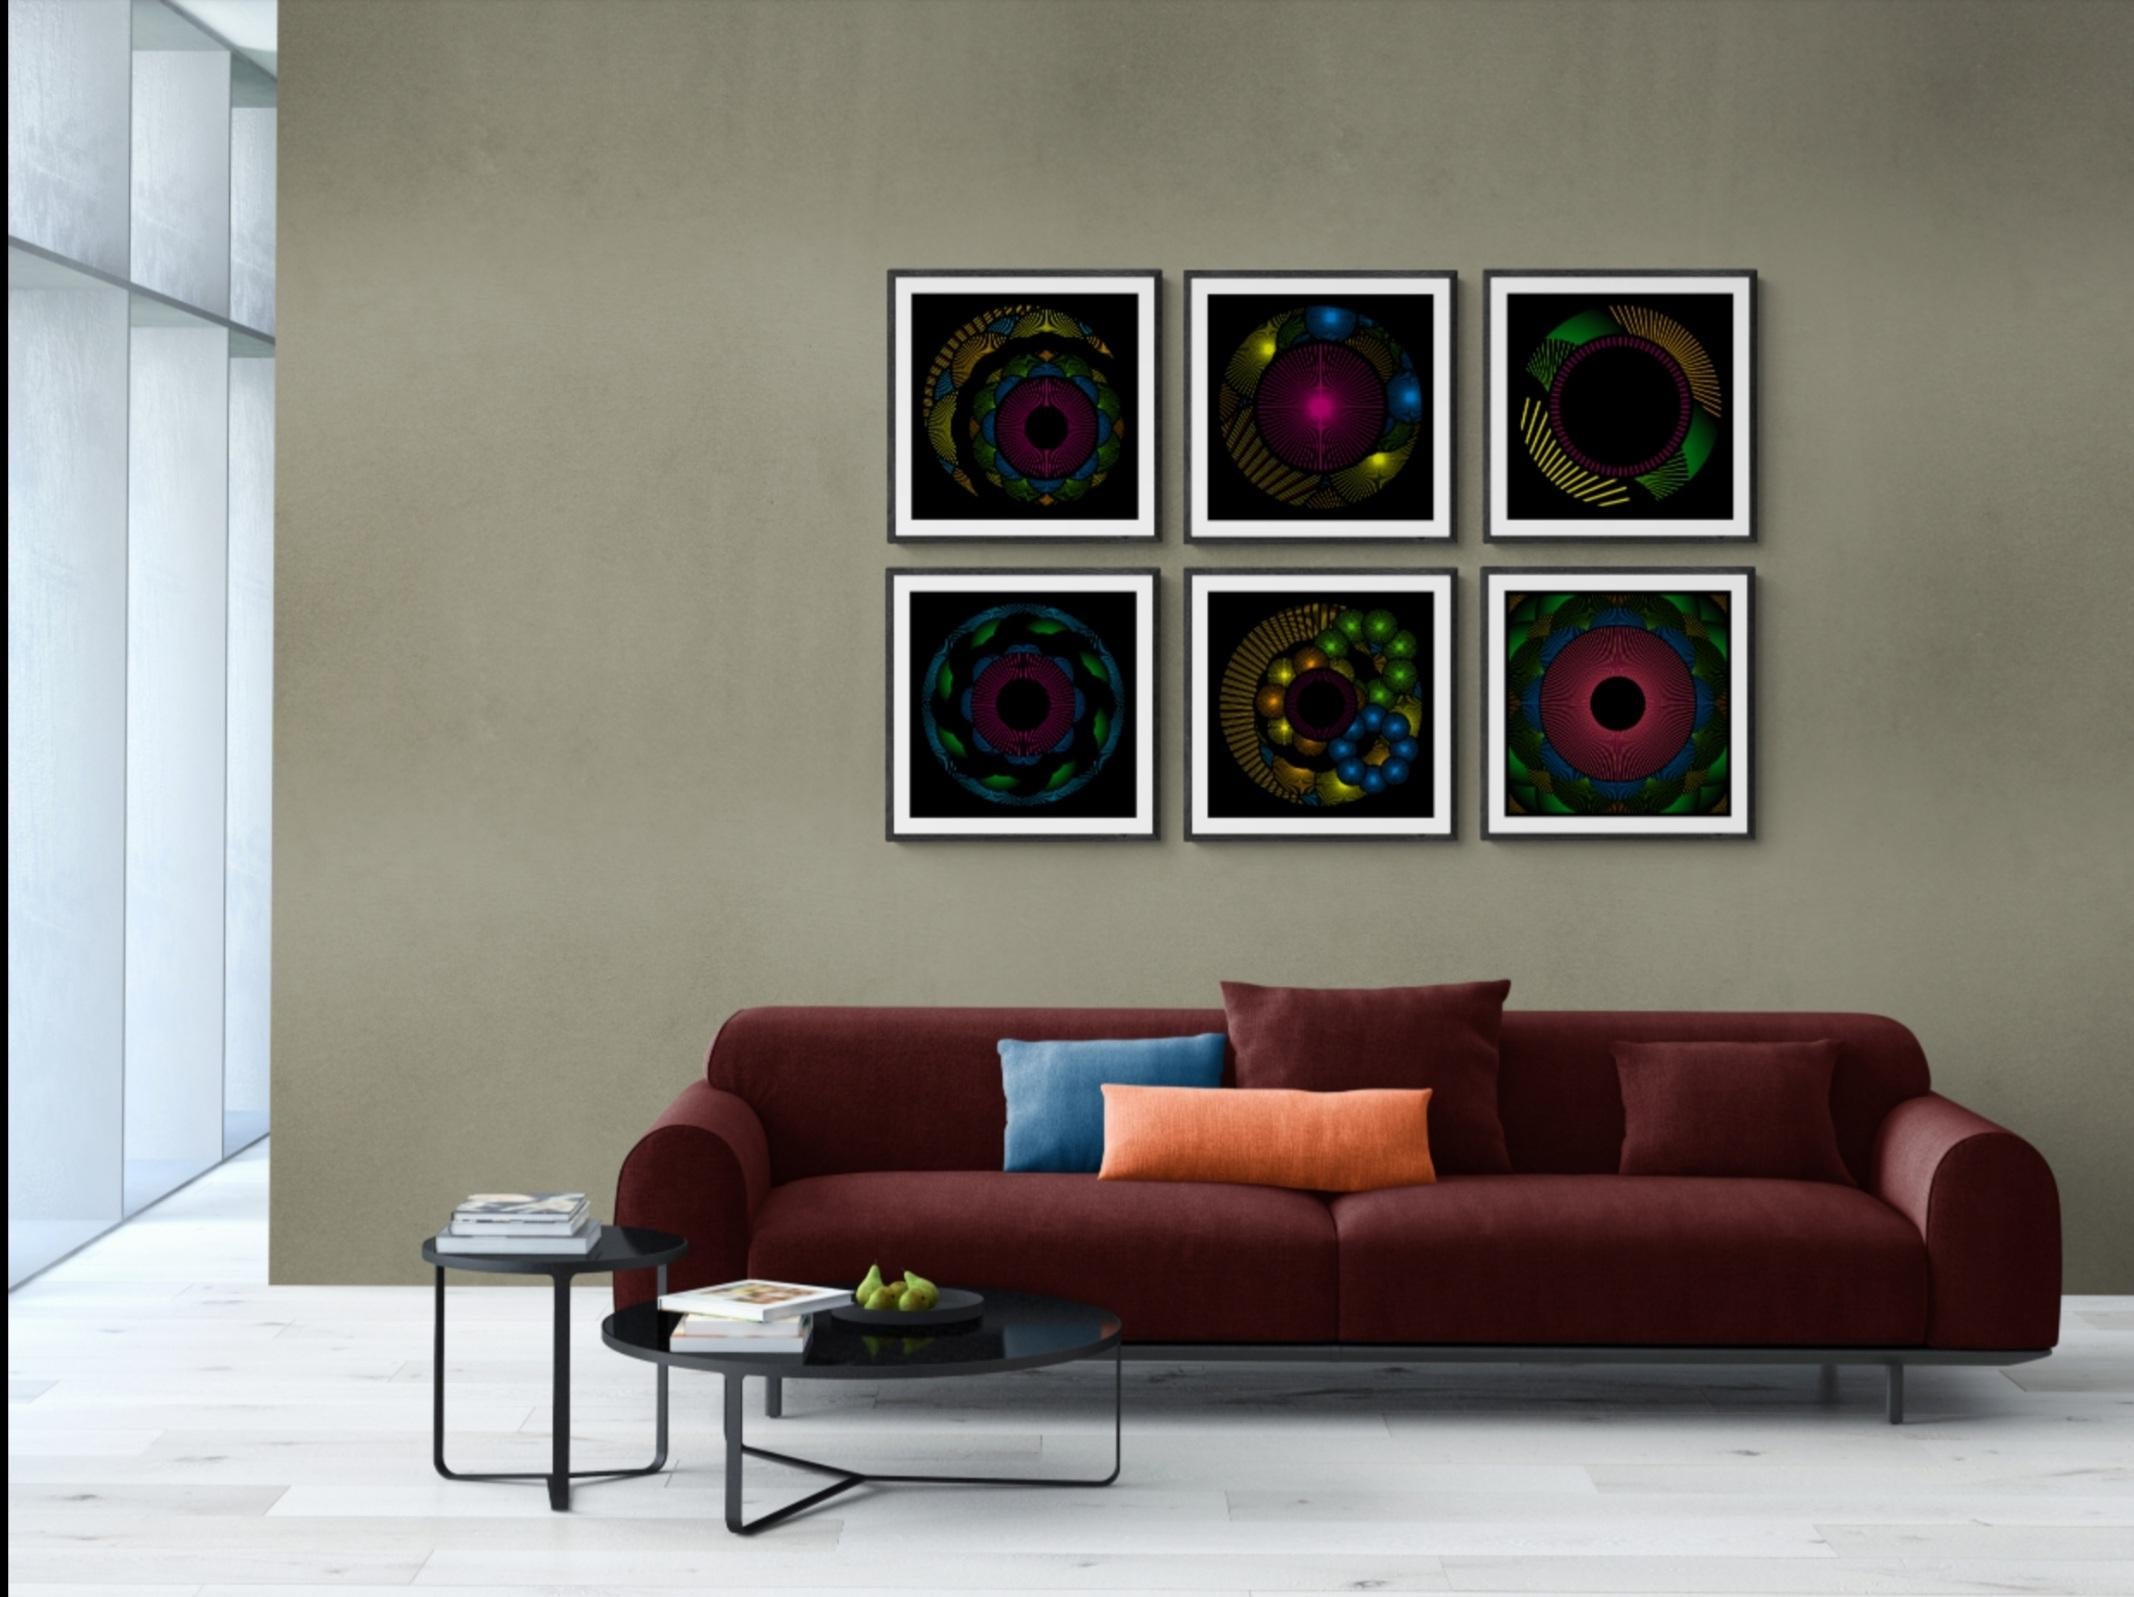 Nebulosa 5 - Abstract Geometric Print by Julio Campos